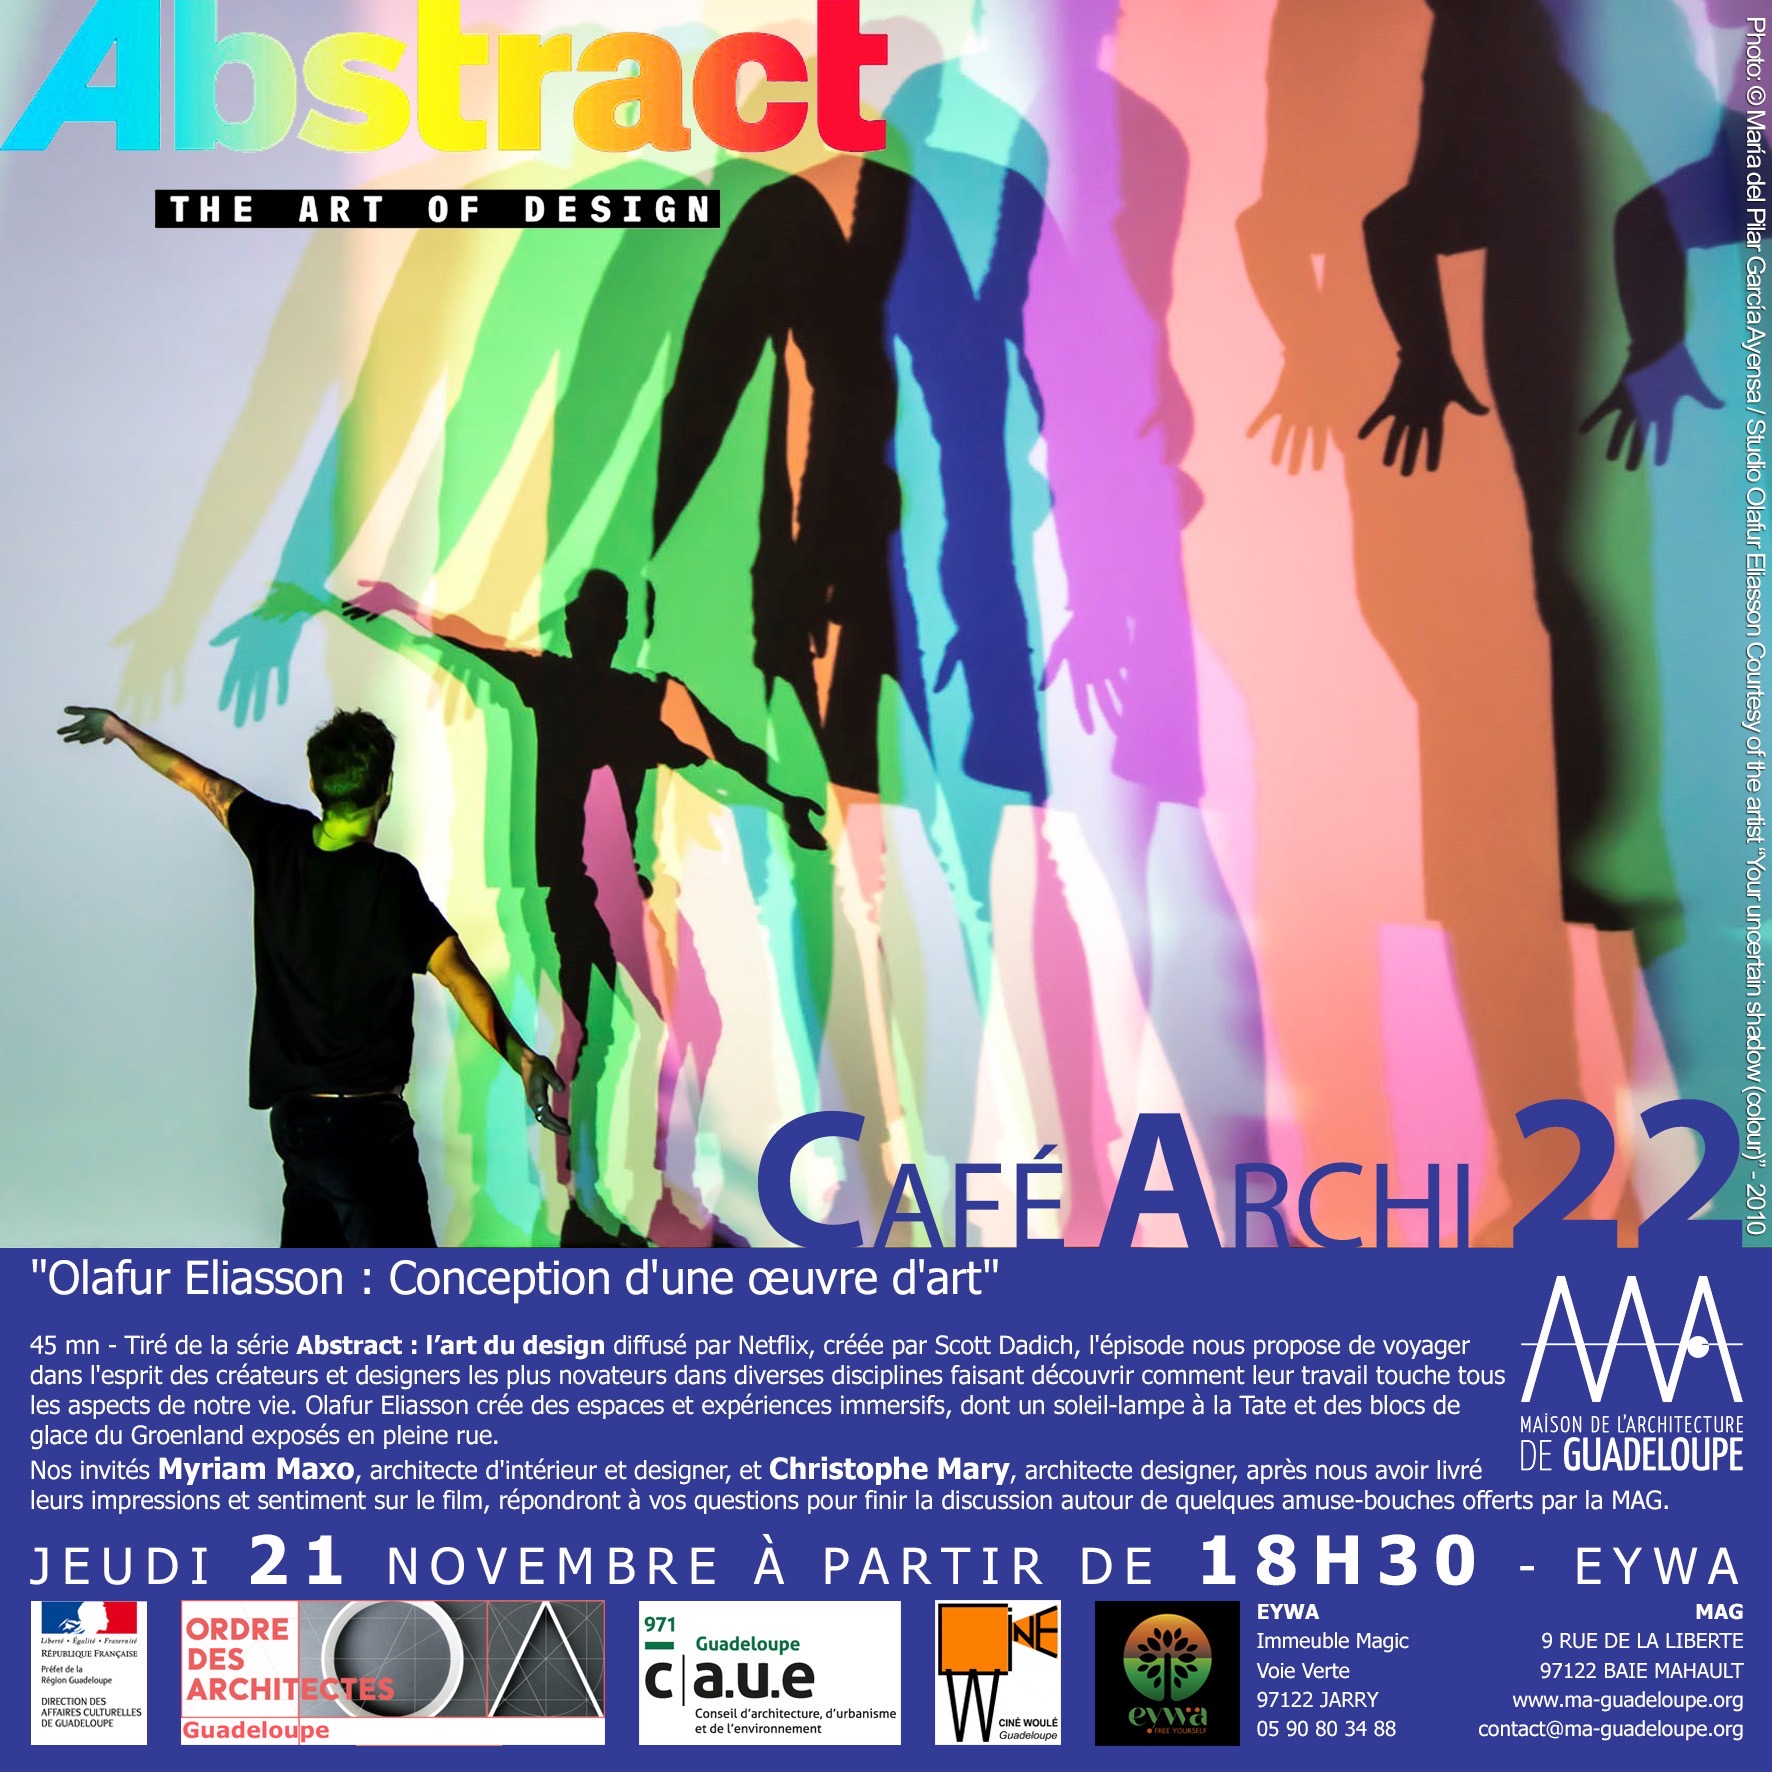 You are currently viewing Café Archi #22